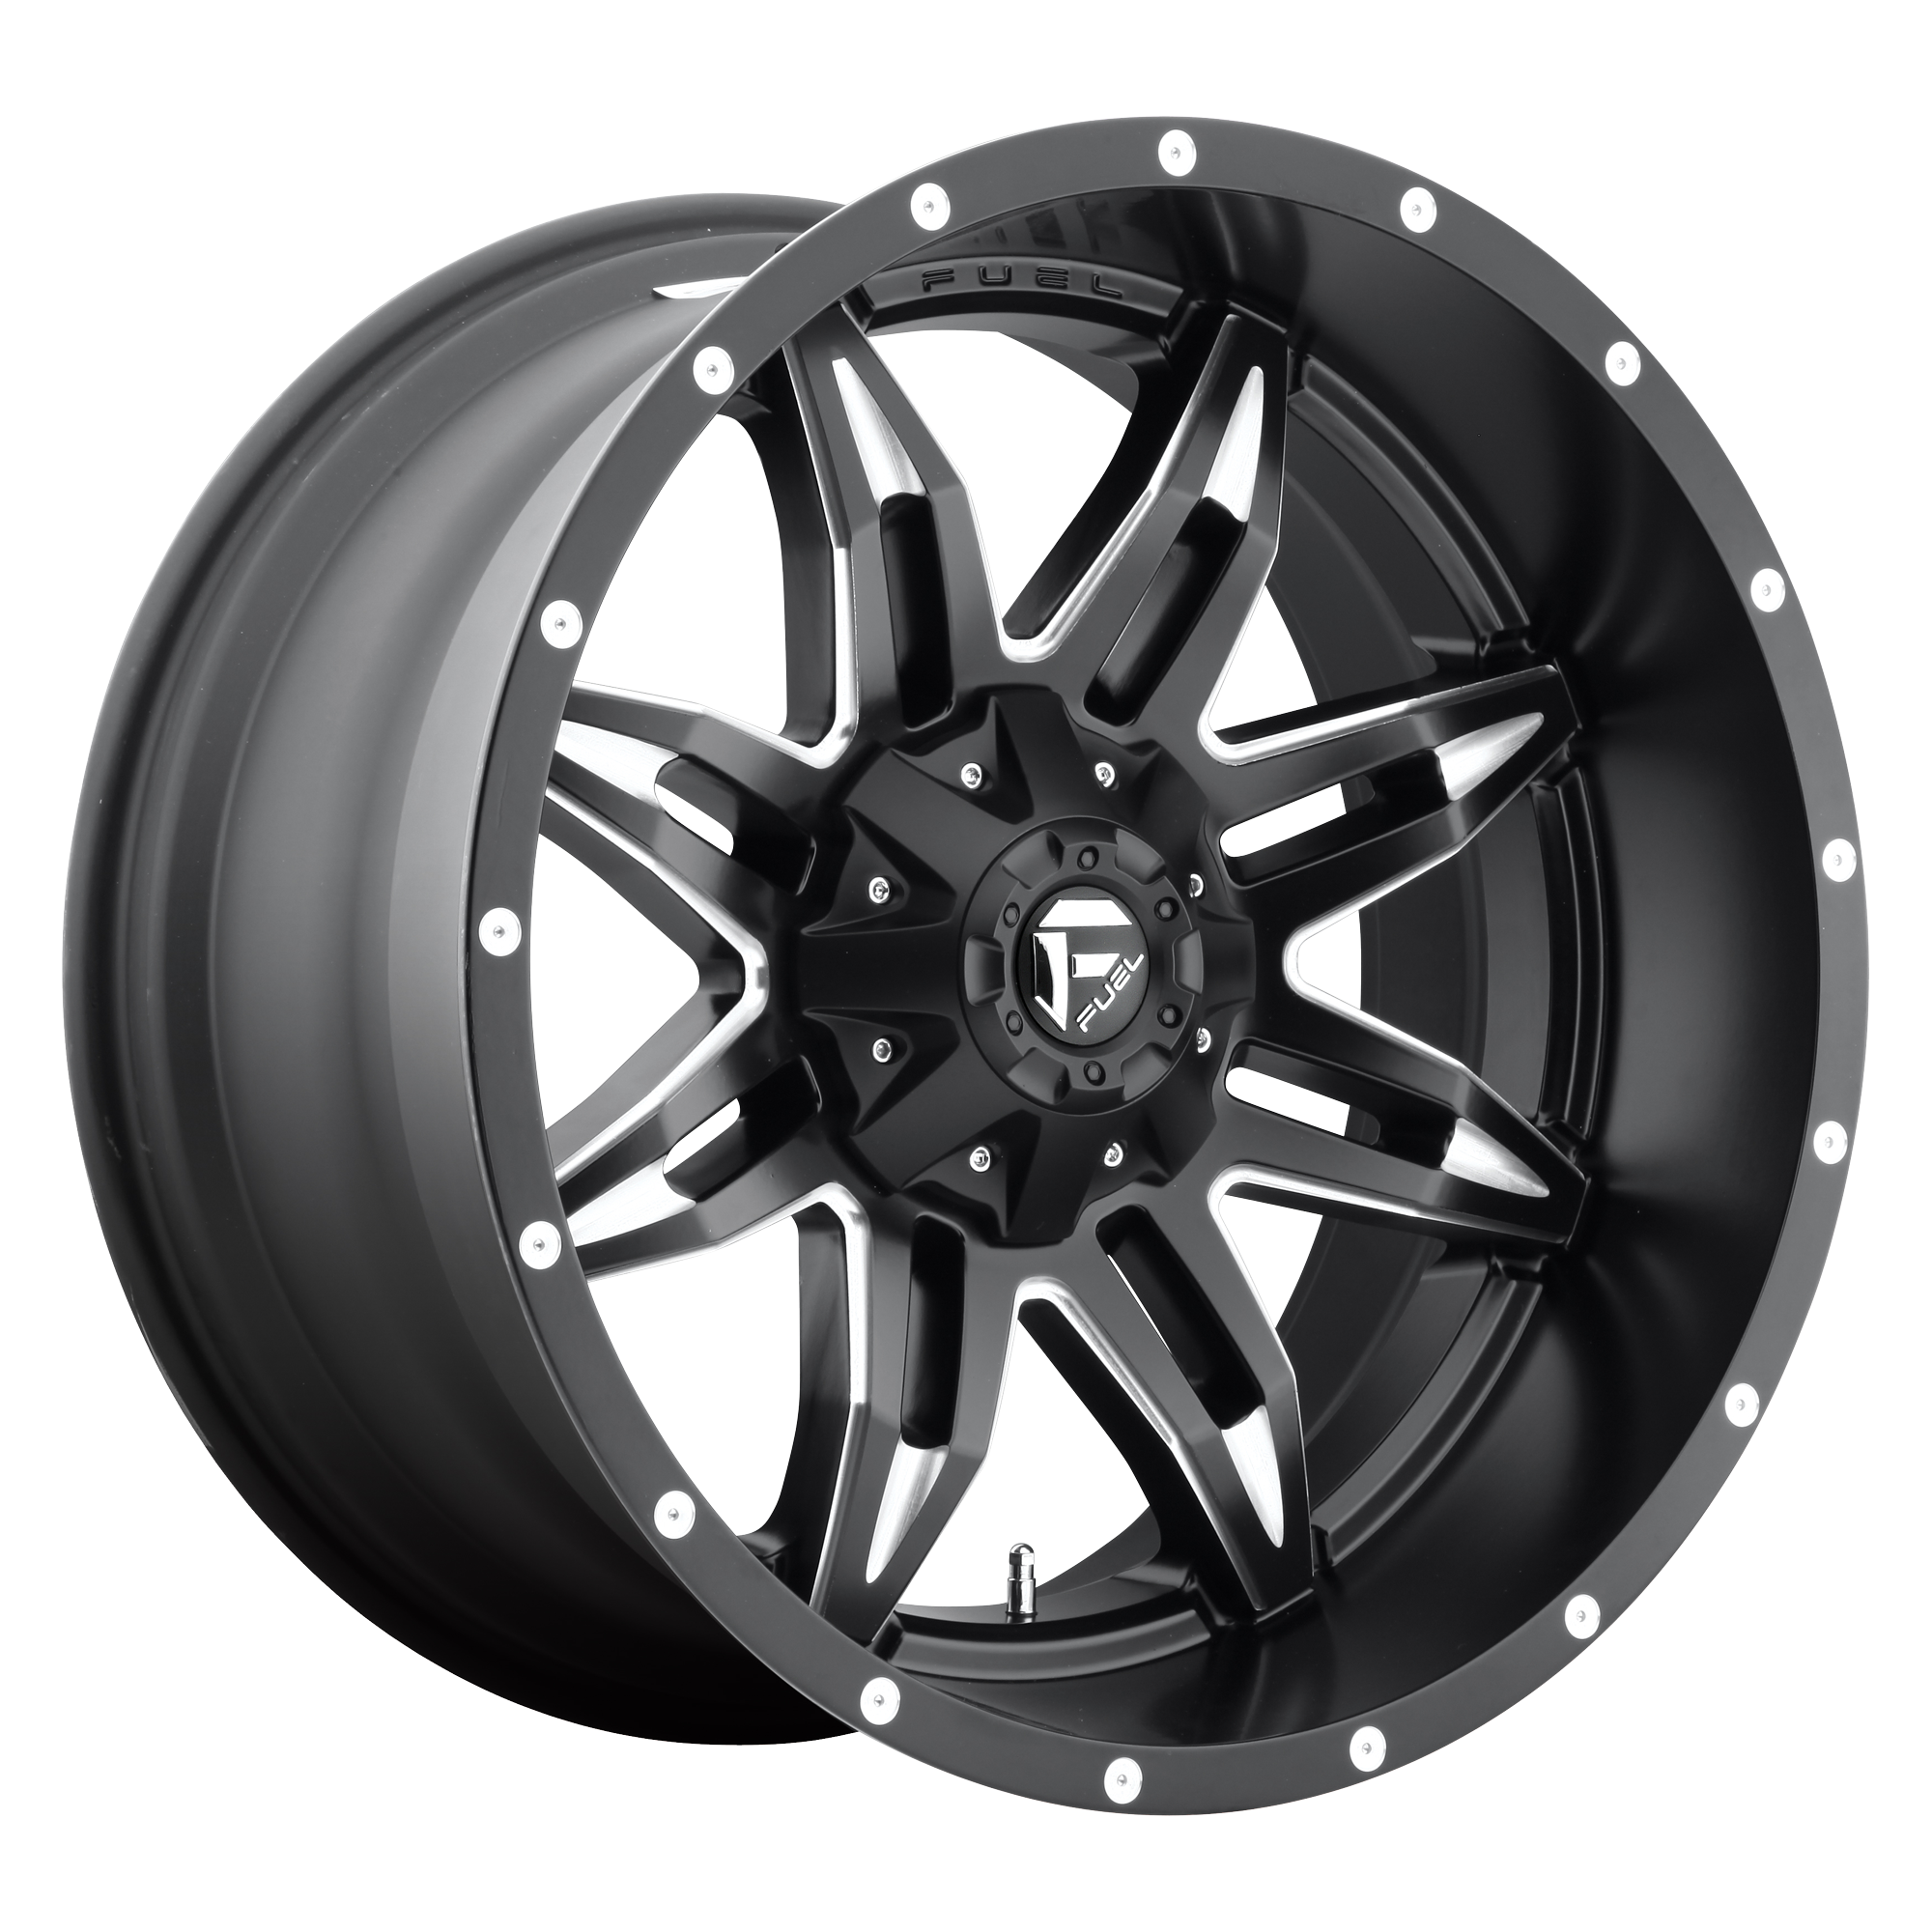 LETHAL 20x10 8x170.00 MATTE BLACK MILLED (-24 mm) - Tires and Engine Performance